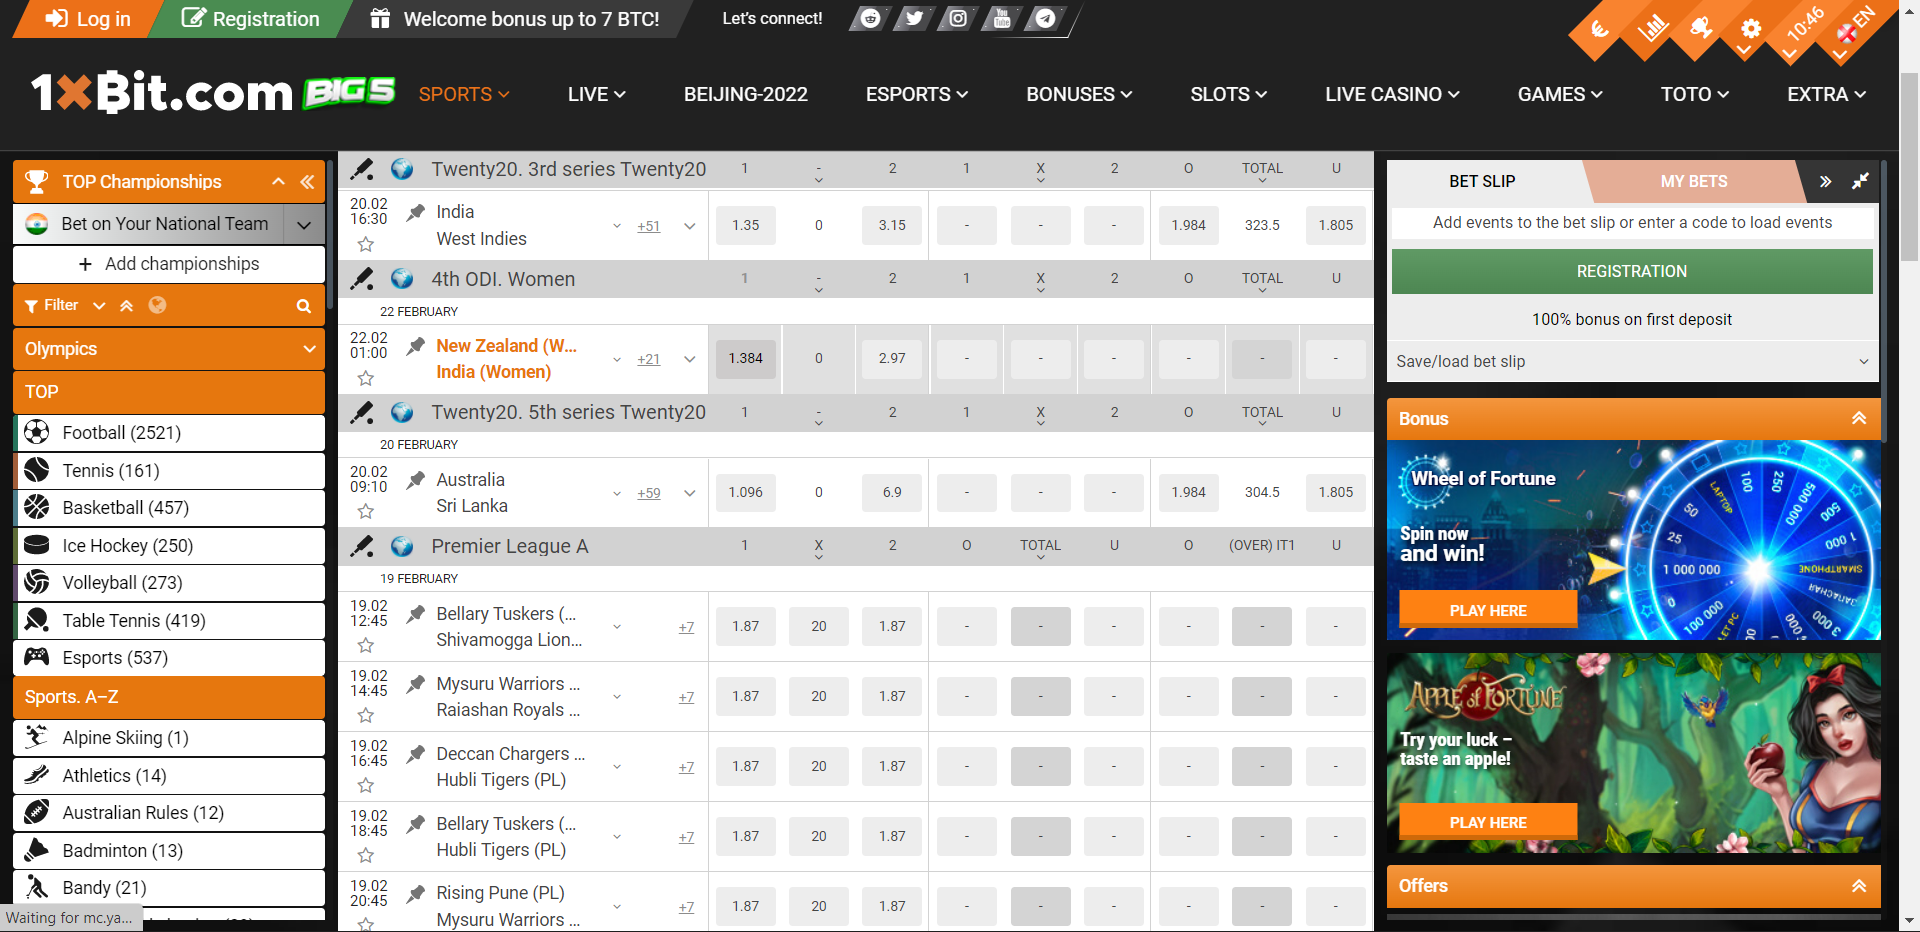 Website of 1xBit, showing the betting page for sports